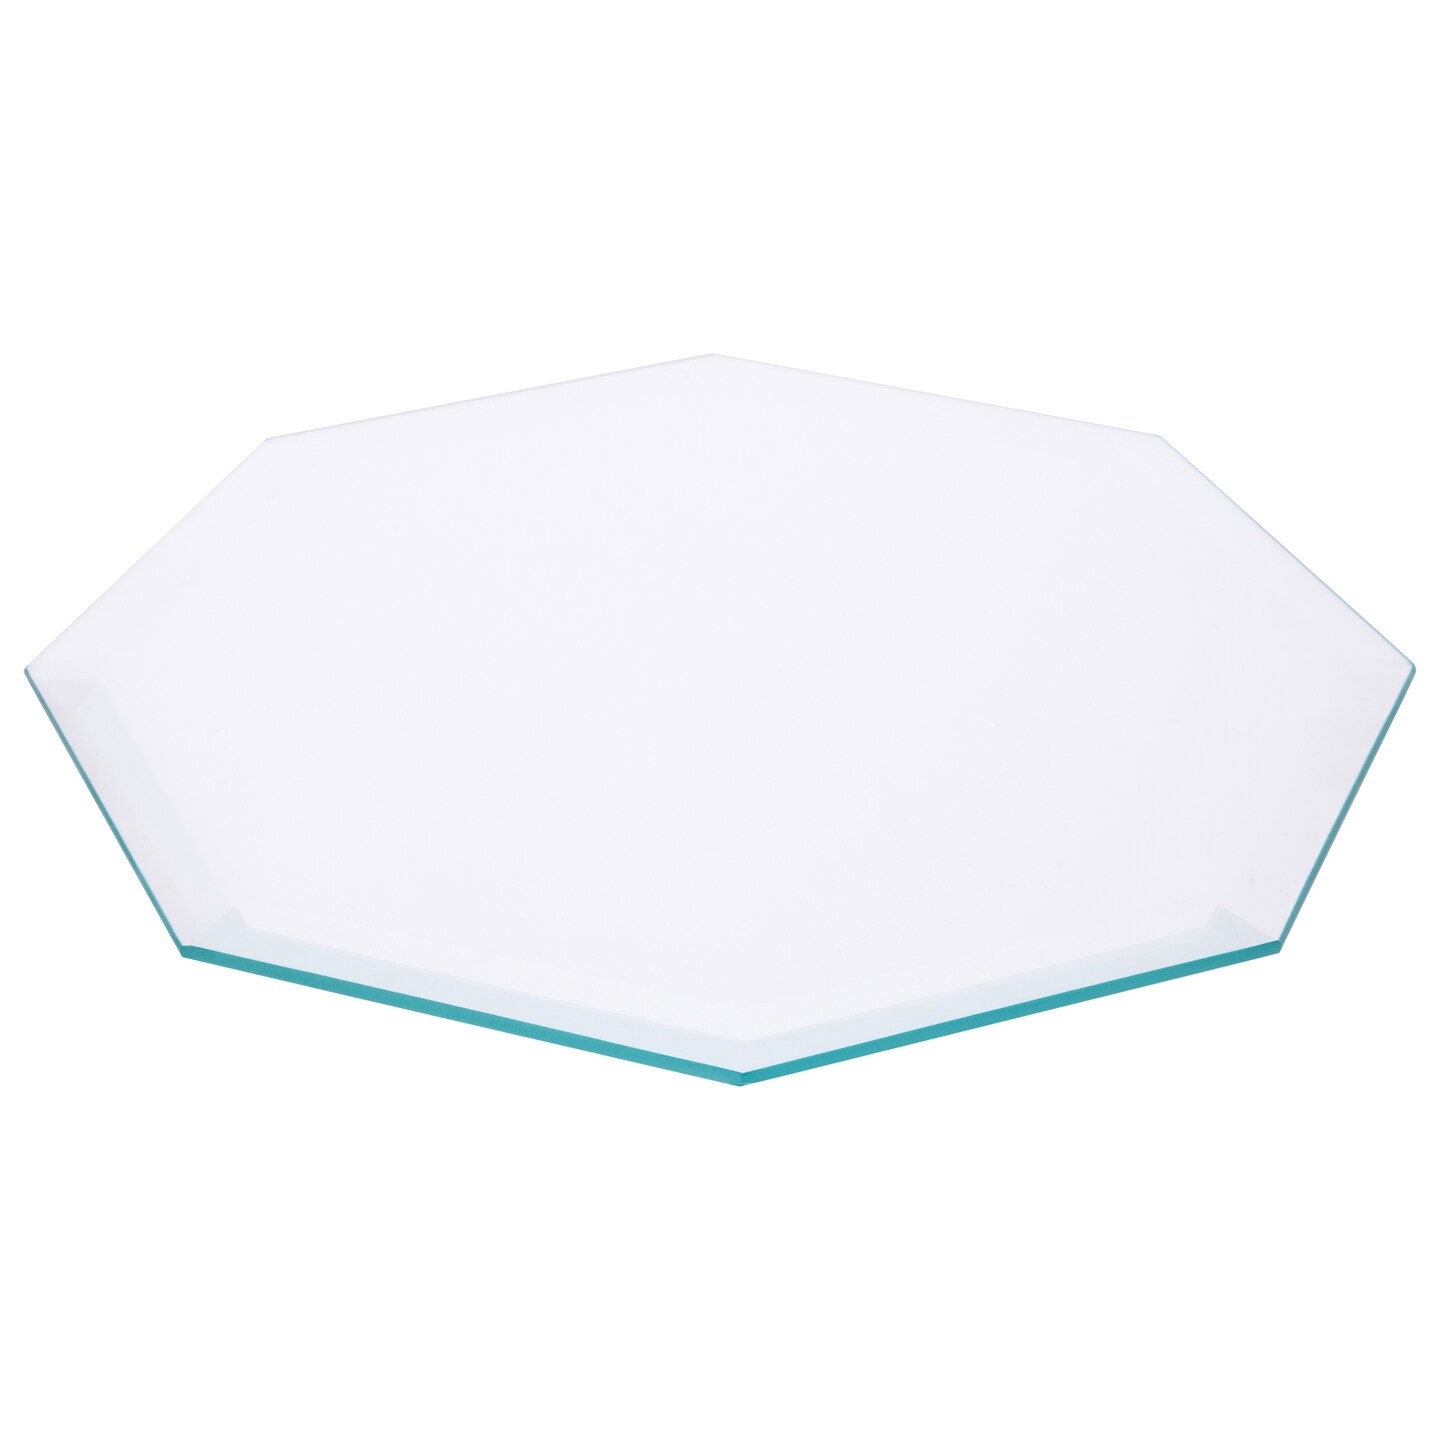 Plymor Octagon 5mm Beveled Clear Glass, 8 inch x 8 inch